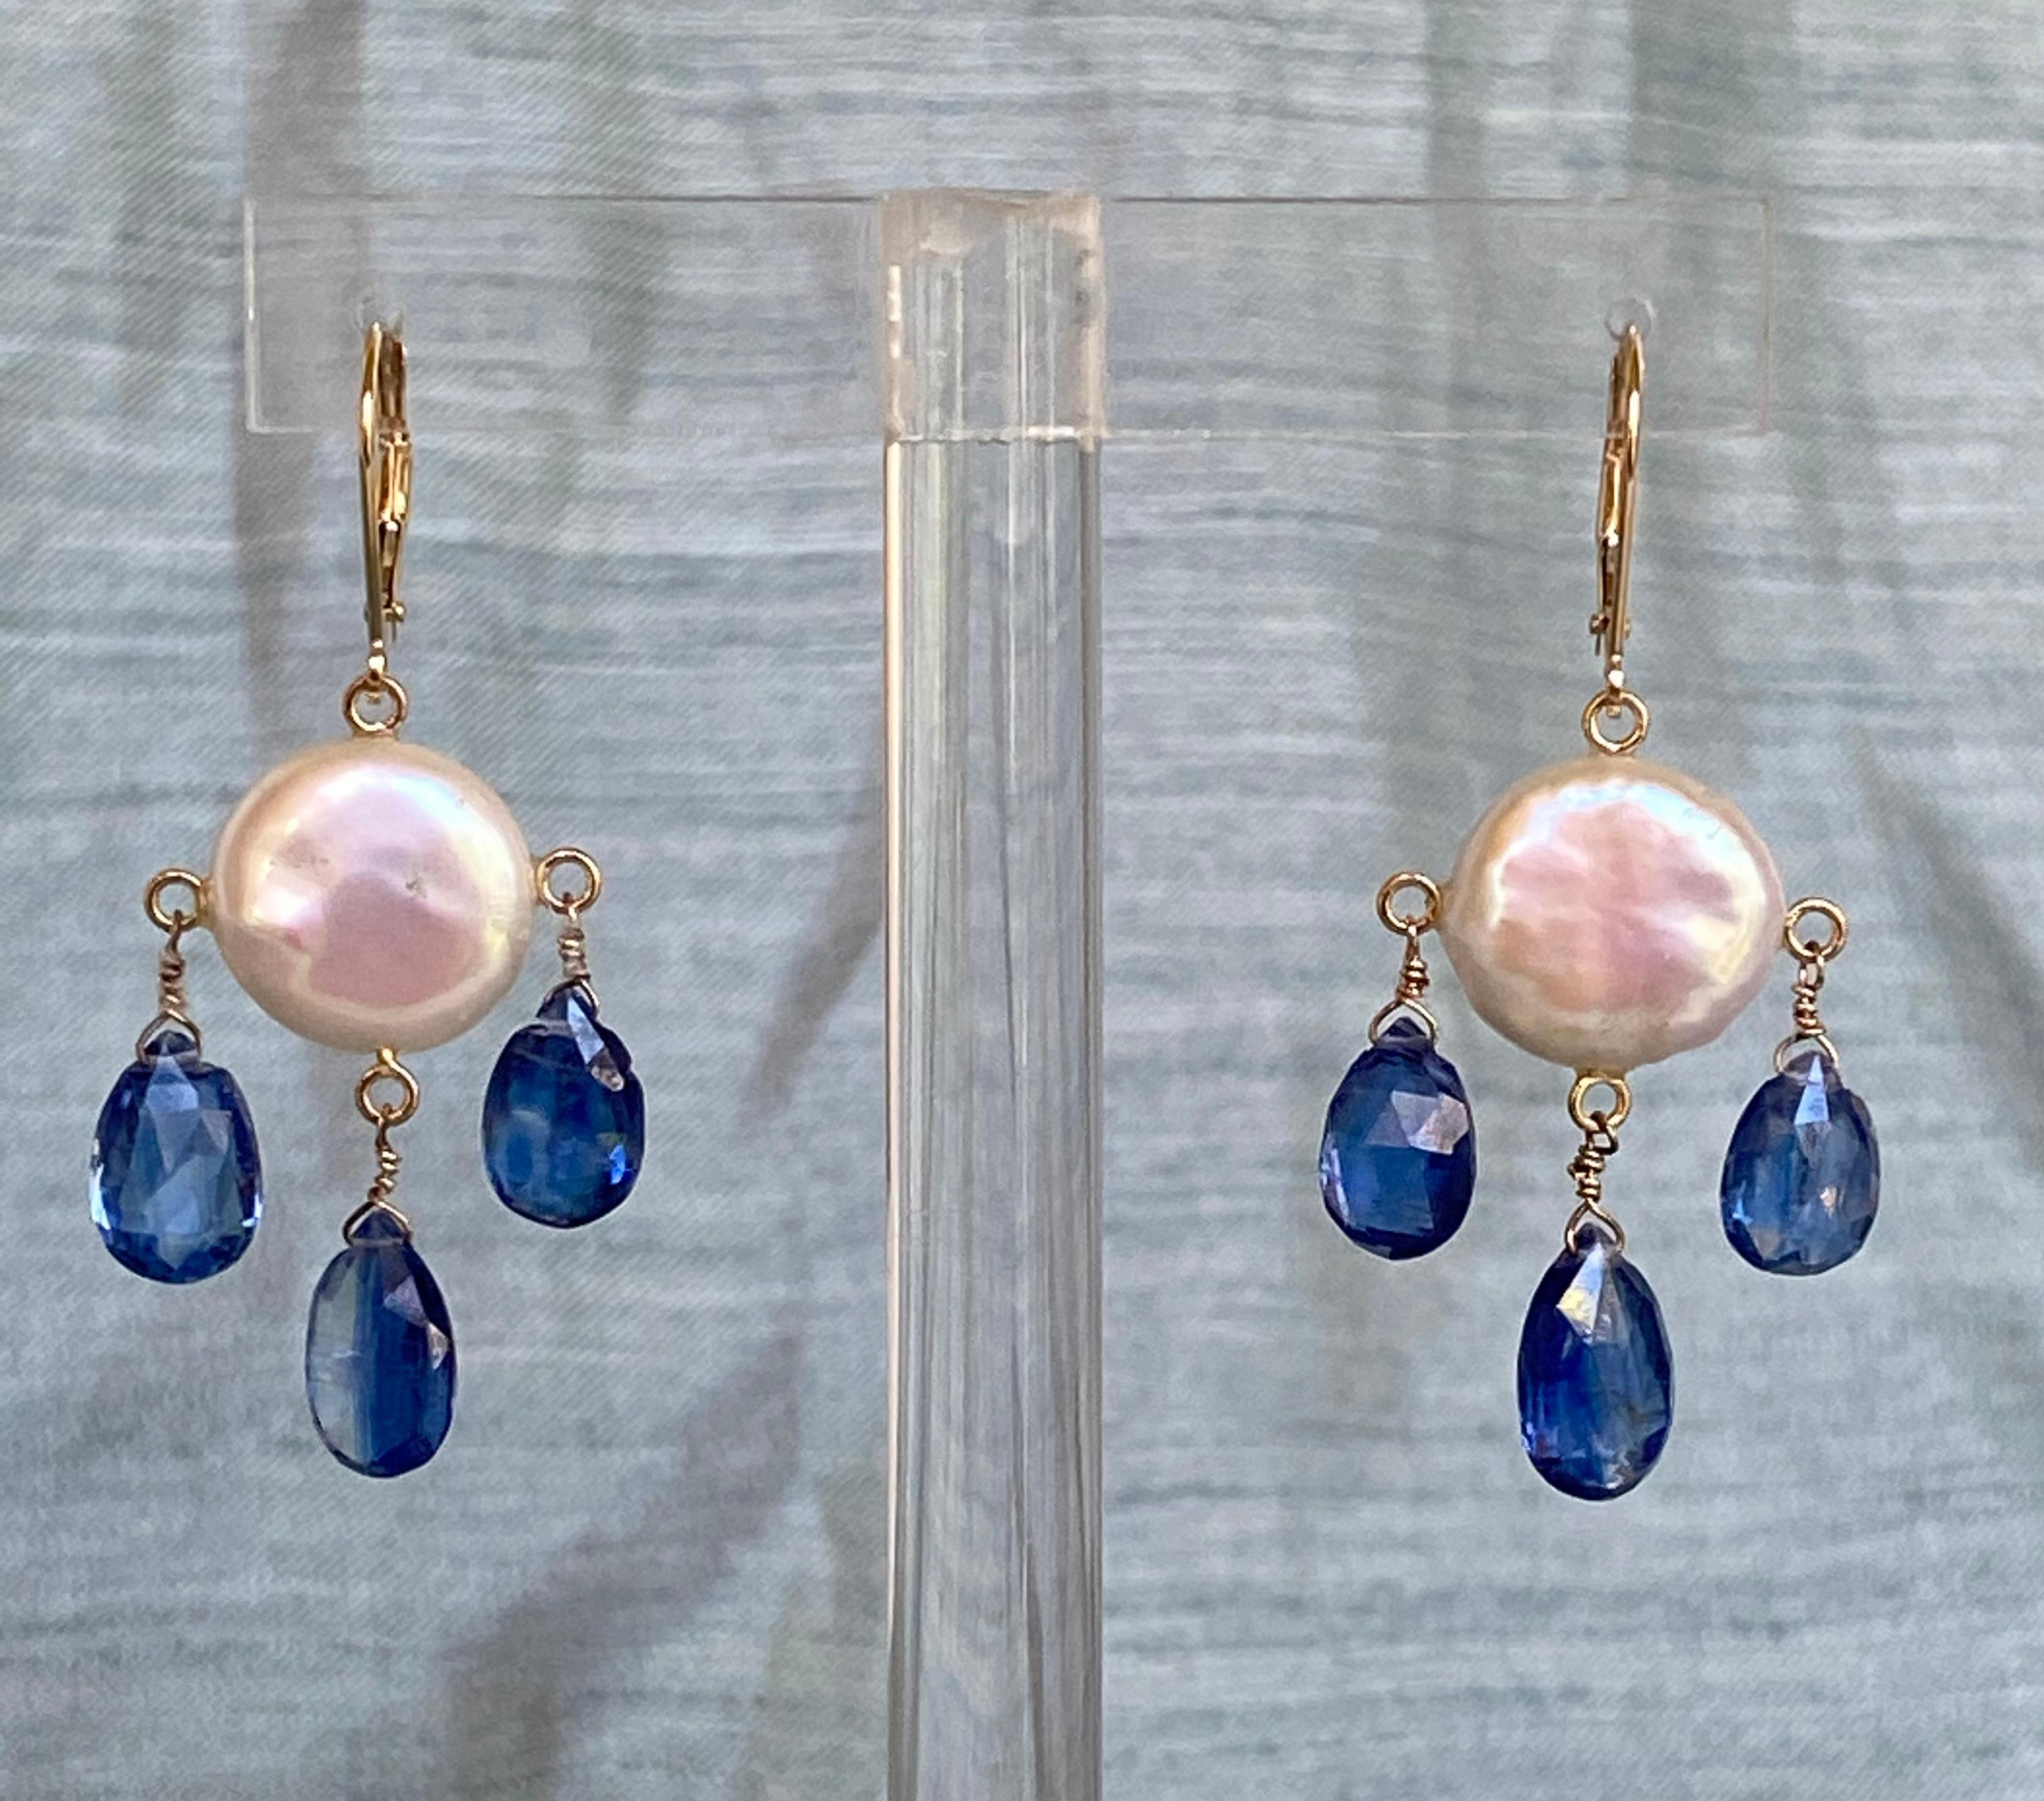 These white coin pearl and kyanite drop earrings with 14k yellow gold lever-backs and findings are strikingly beautiful. The deep royal blue faceted kyanite drops harmoniously hang with a glowing white coin pearl. These earrings are held together